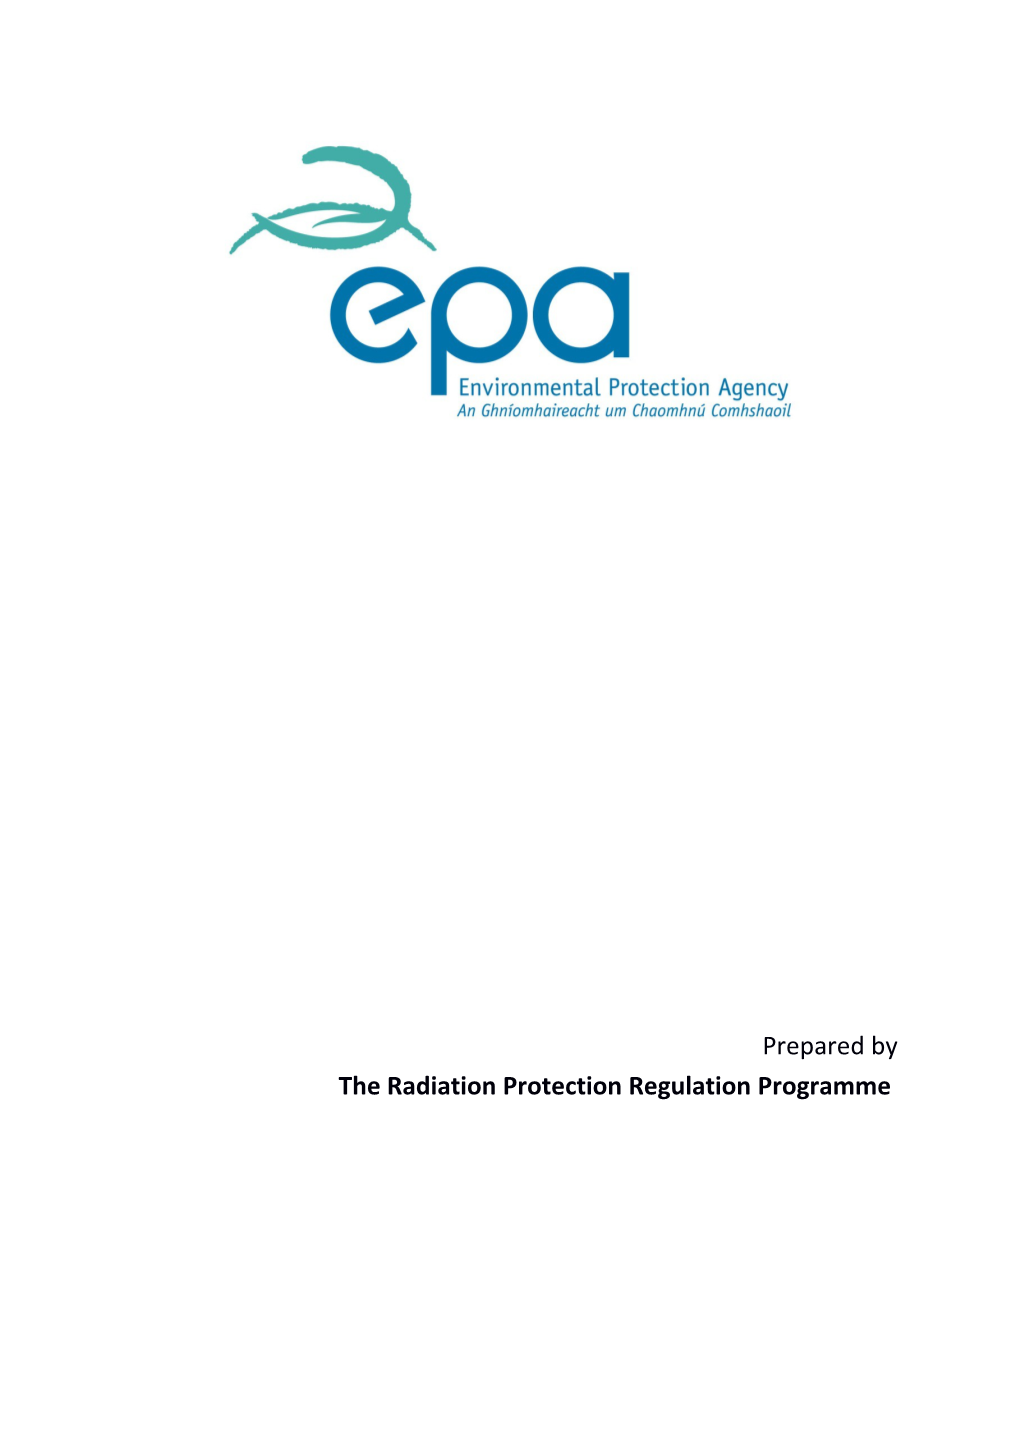 The Radiation Protection Regulation Programme